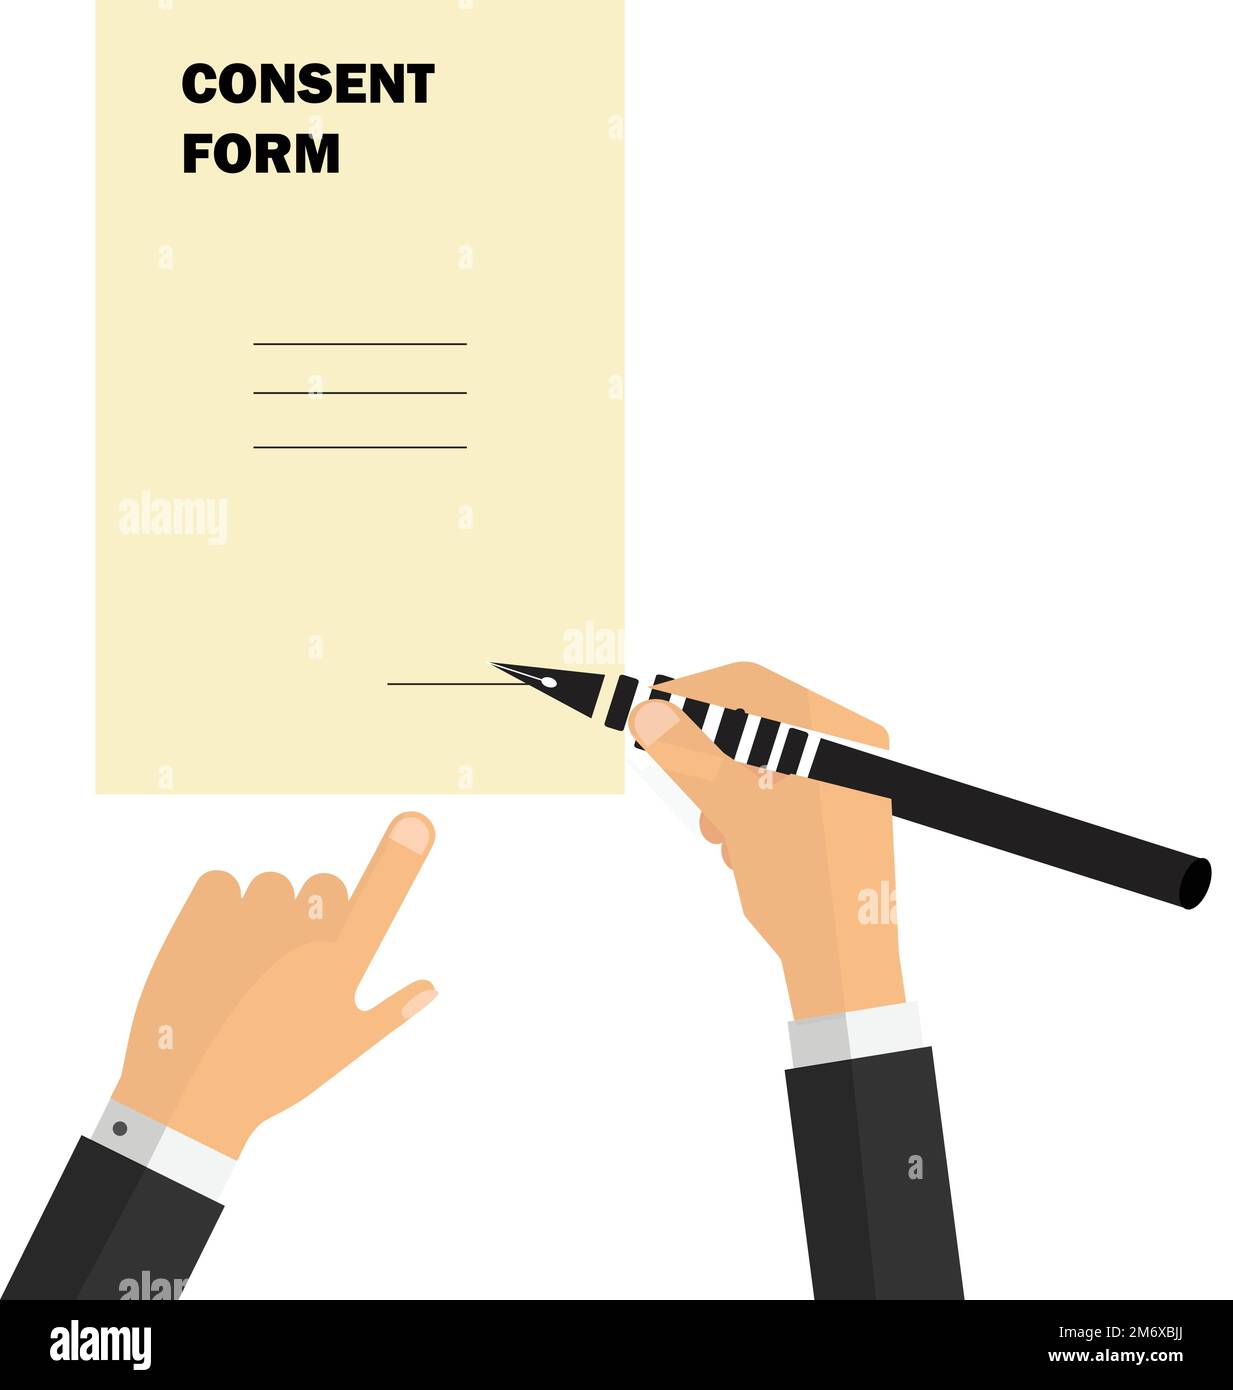 Hands of a person signing a consent form Stock Vector